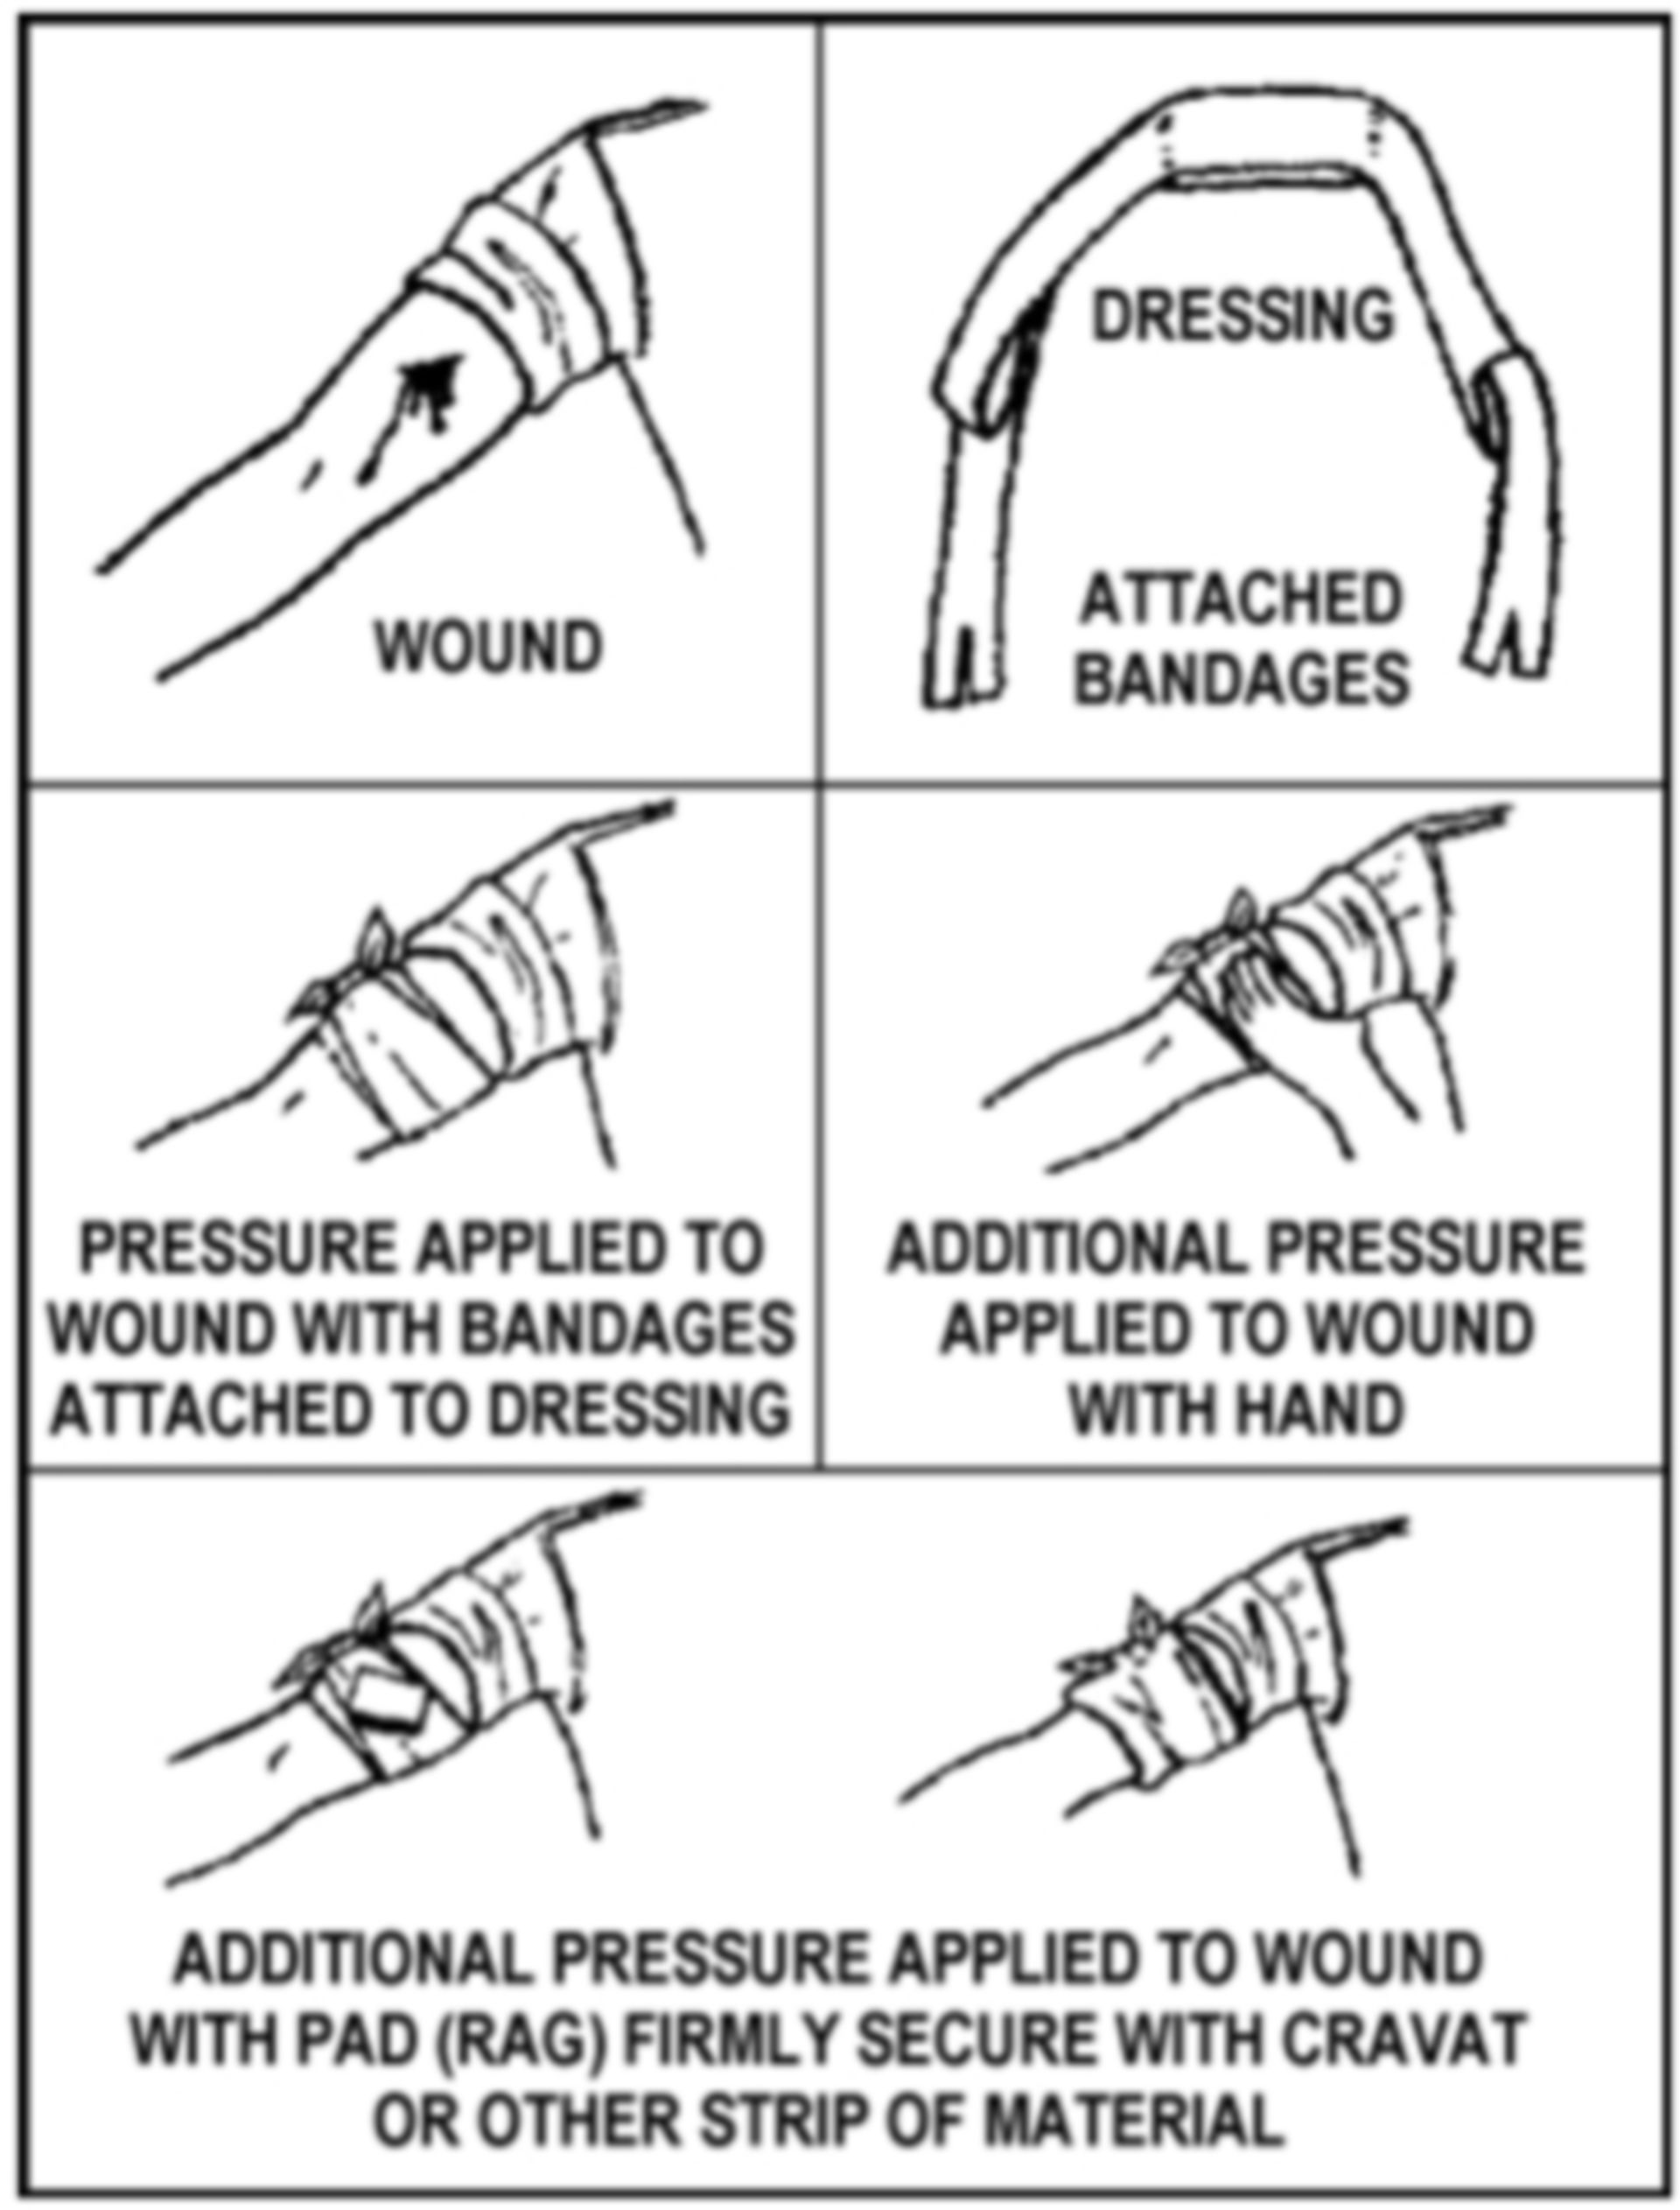 Placement of a pressure dressing